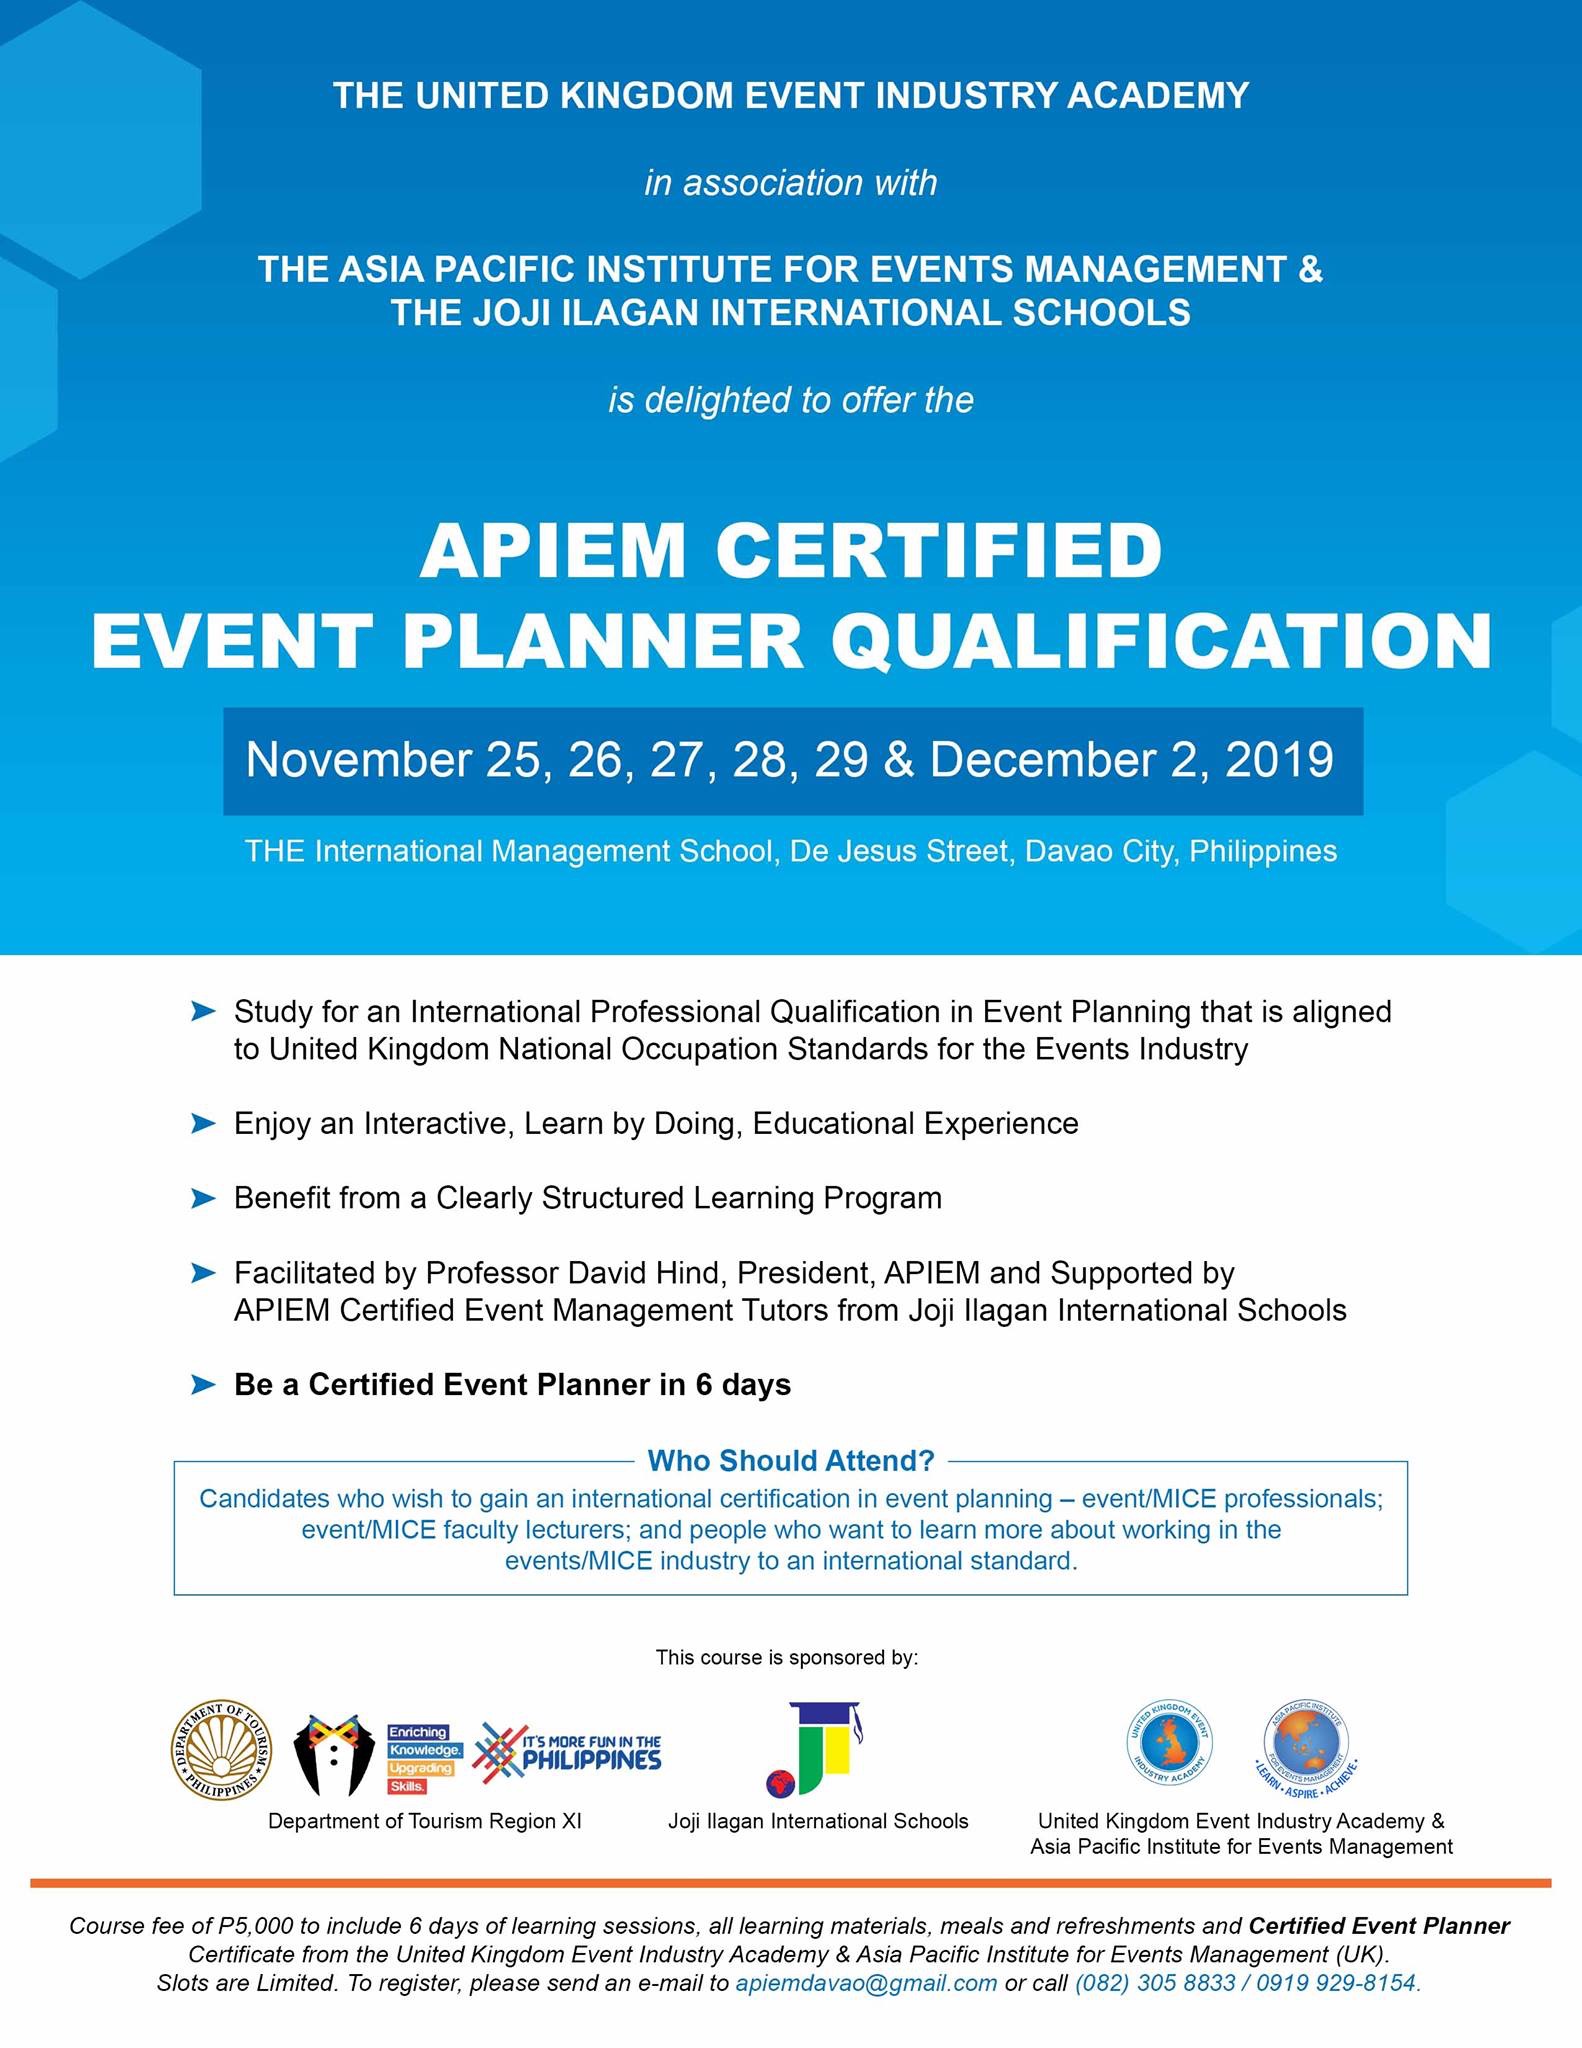 The APIEM Certified Event Planner Qualification is Offered in the